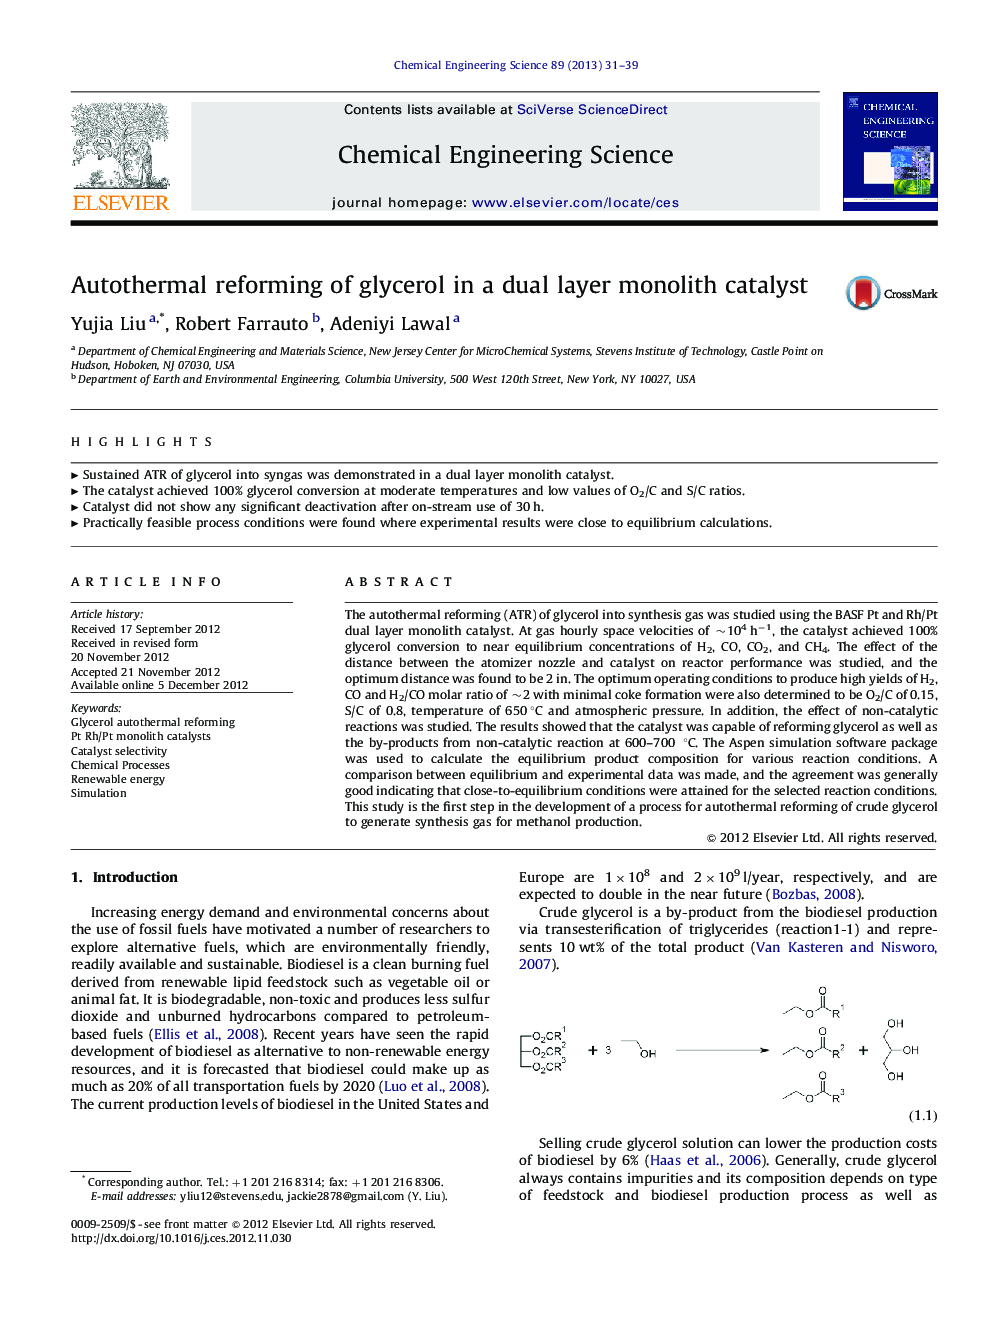 Autothermal reforming of glycerol in a dual layer monolith catalyst